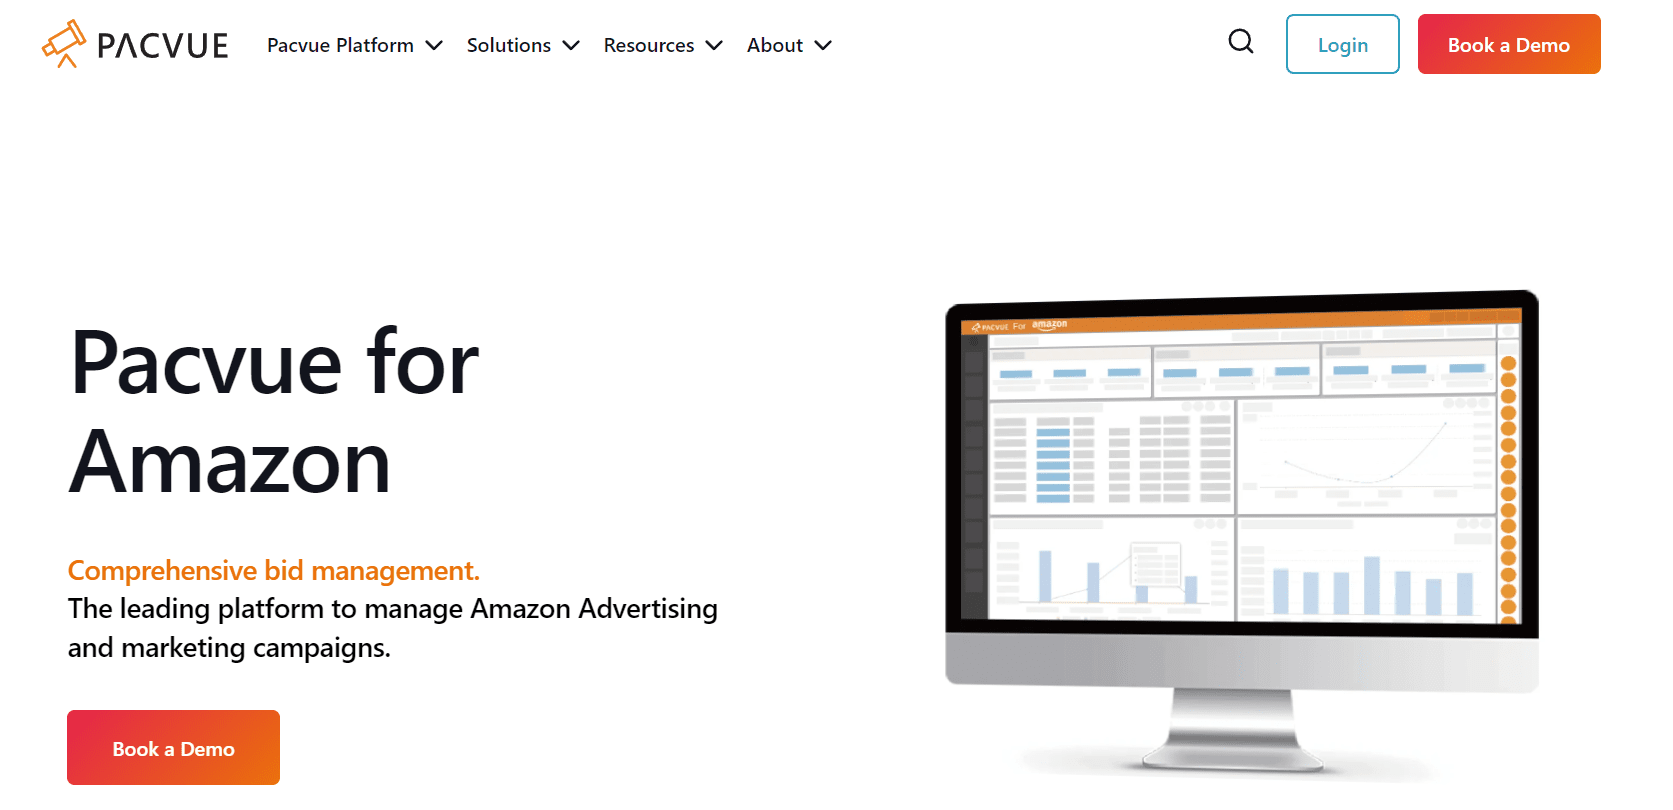 Pacvue for Amazon integrates paid ads